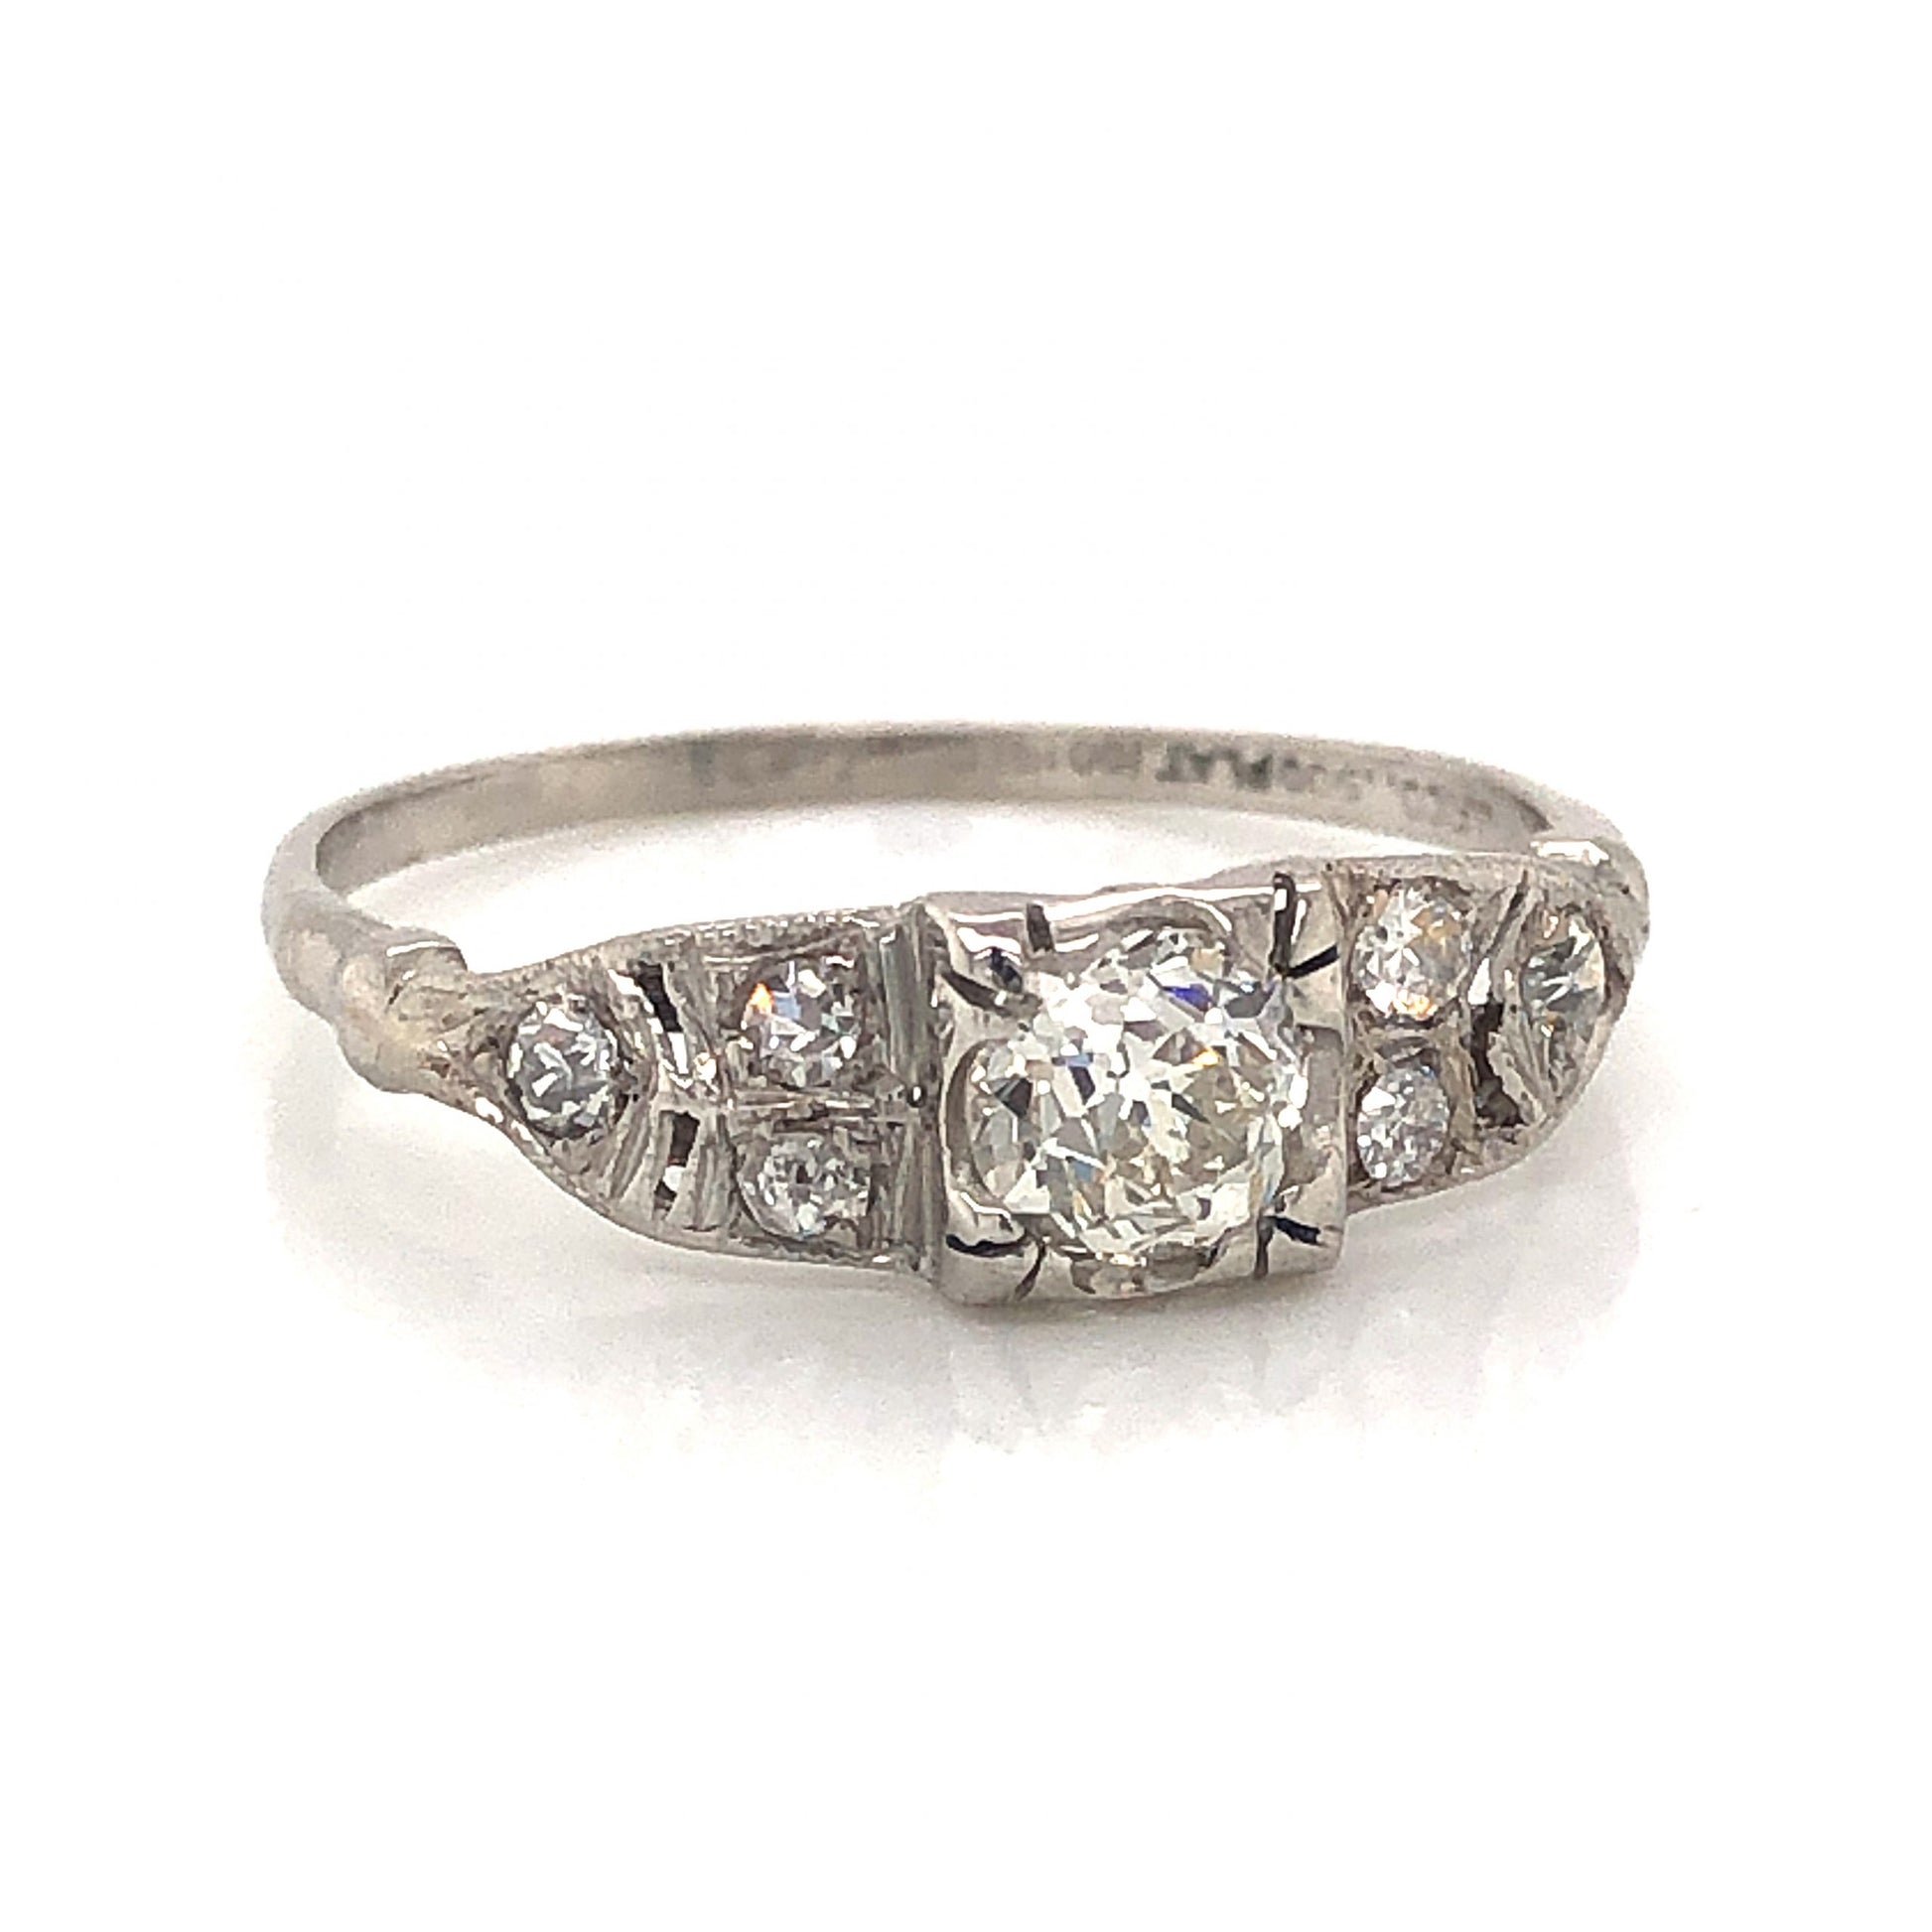 .43 Art Deco Diamond Engagement Ring in PlatinumComposition: Platinum Ring Size: 7 Total Diamond Weight: .58 cttwct Total Gram Weight: 2.0 g Inscription: J.F. CO. 900 PLAT 100 IRID, 346
      